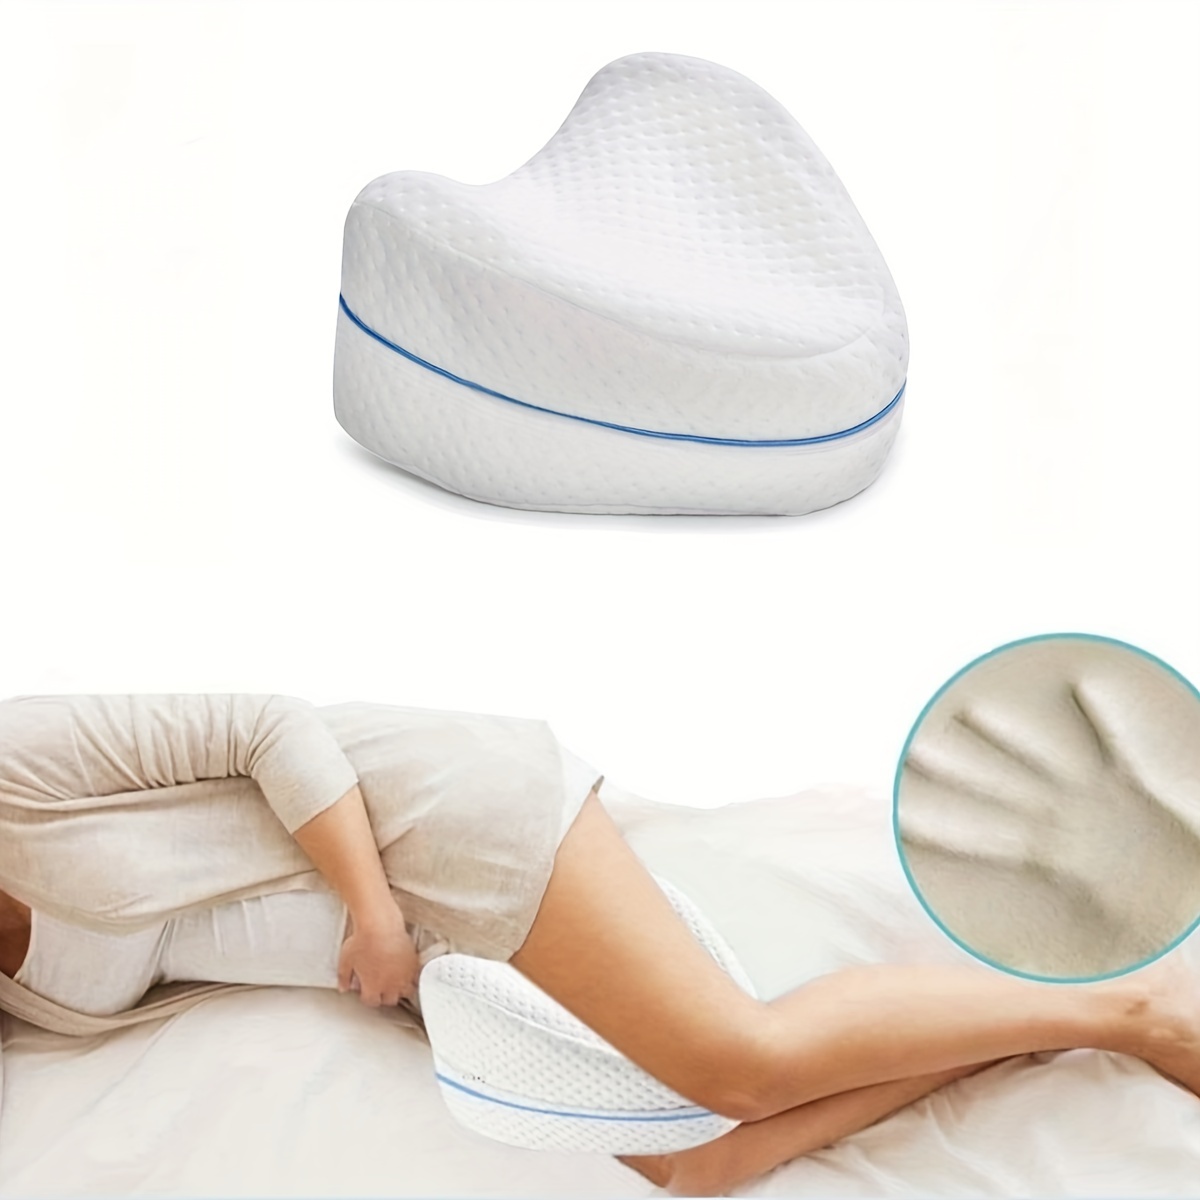 Memory Foam Leg Pillow For Side Sleepers - Relax From Sciatica